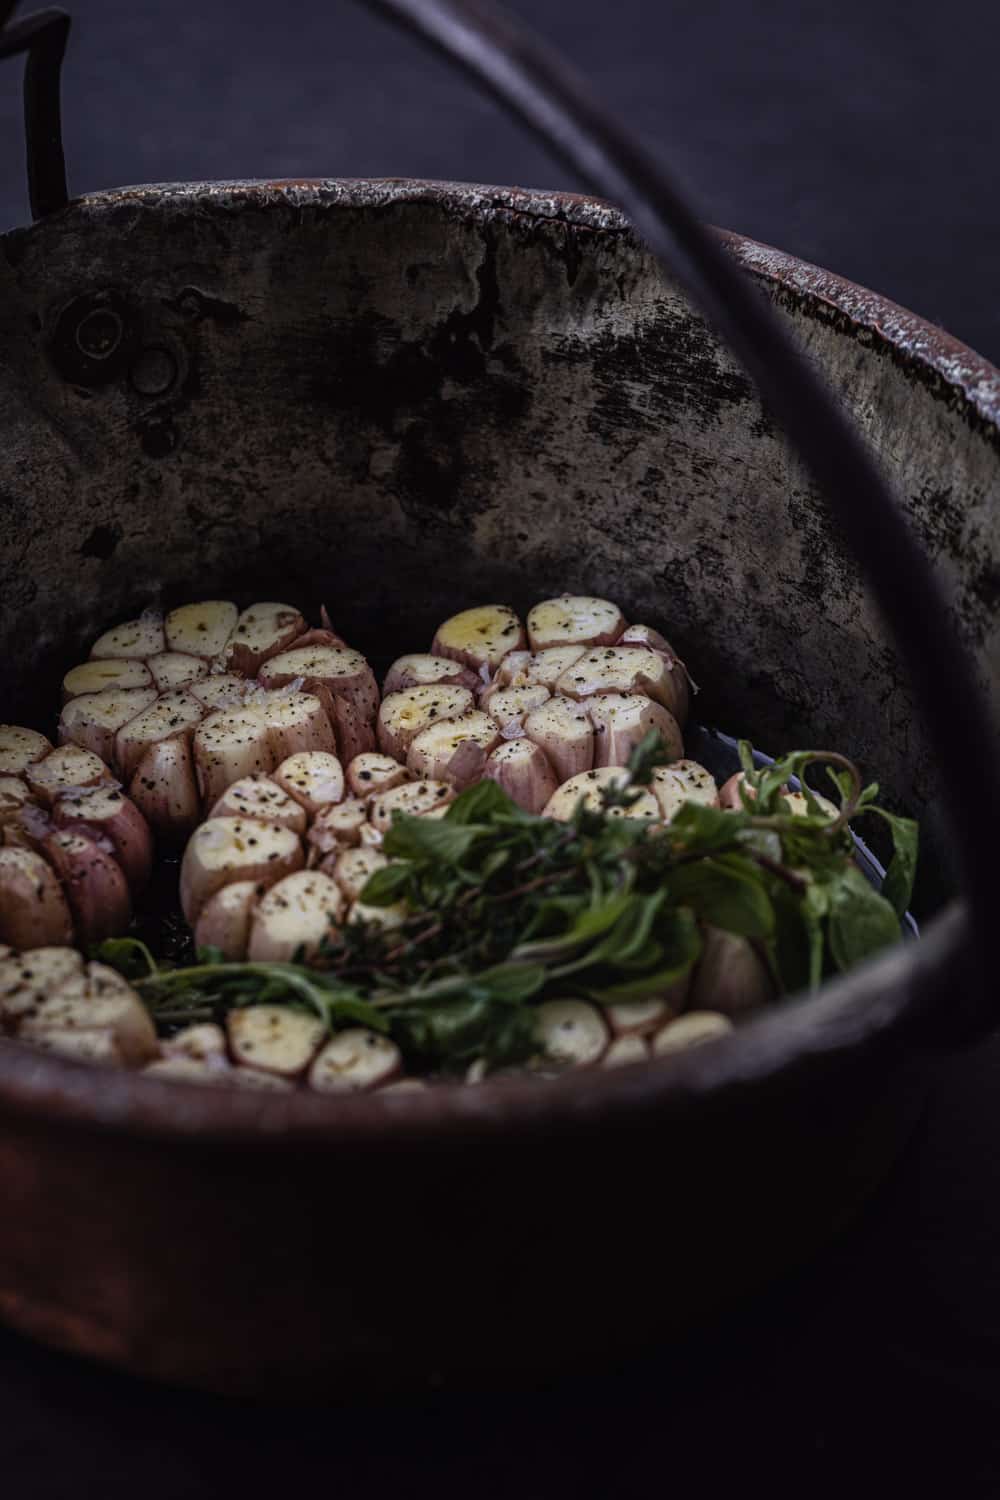 Prep shot of full heads of garlic, with the tops trimmed off and the cloves exposed, with fresh herbs in the pot too.